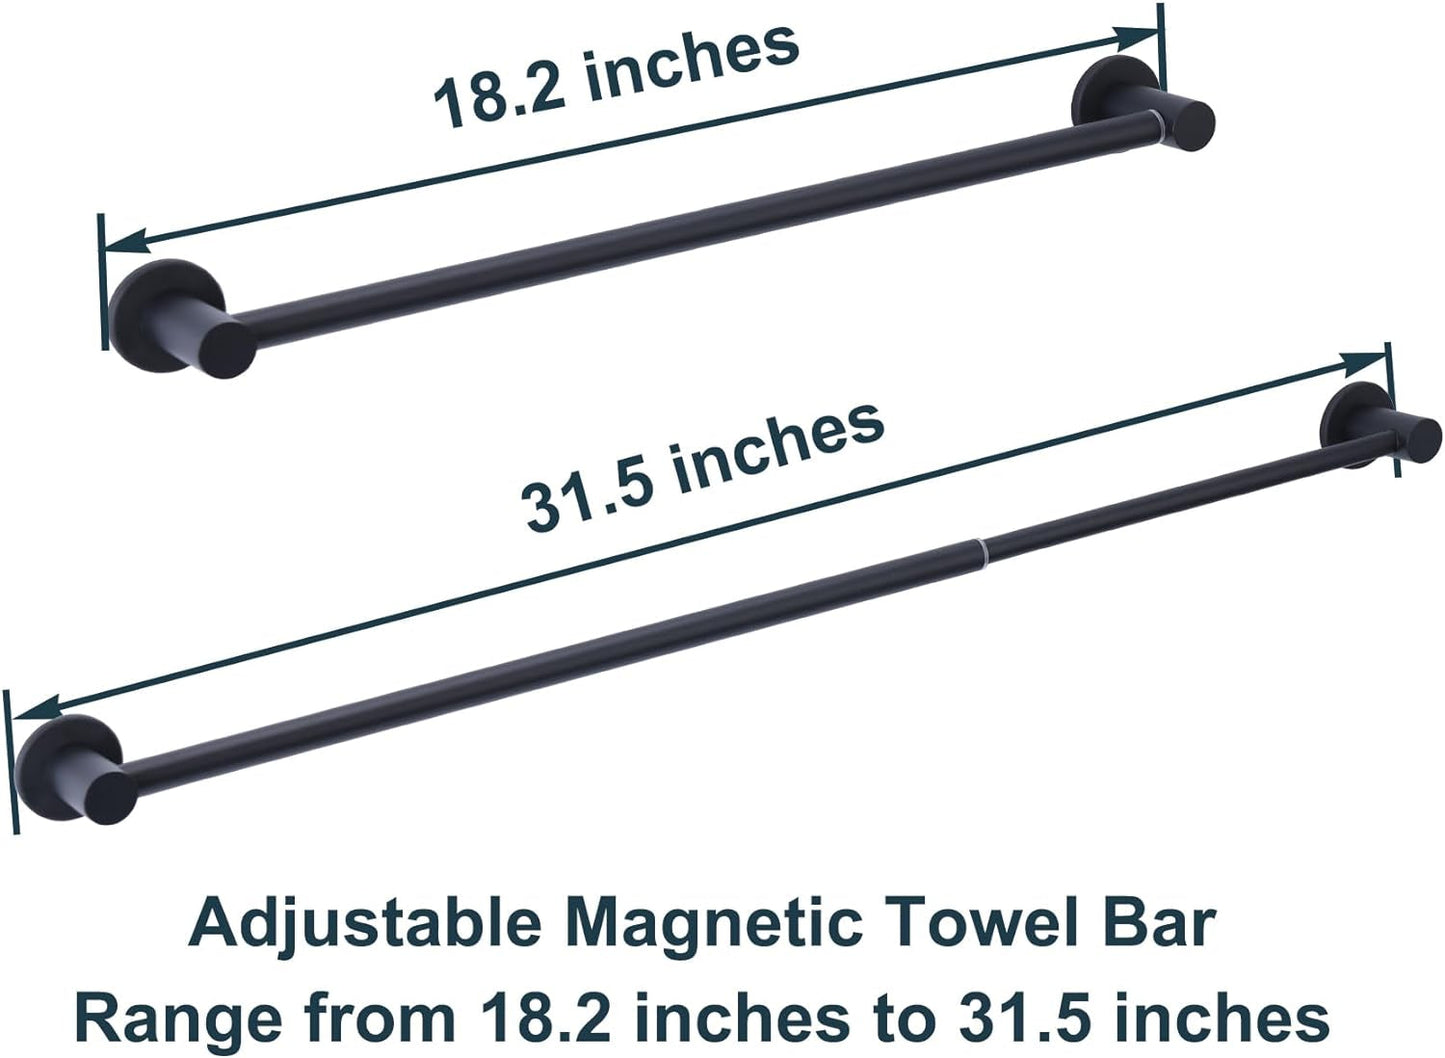 Adjustable Magnetic Towel Bar Holder for Refrigerator, Magnet Classroom Flip Calendar Chart Rod for Whiteboard, Fridge Top Guard Rack Stop Items from Falling, 18-31.5 Inches, Black